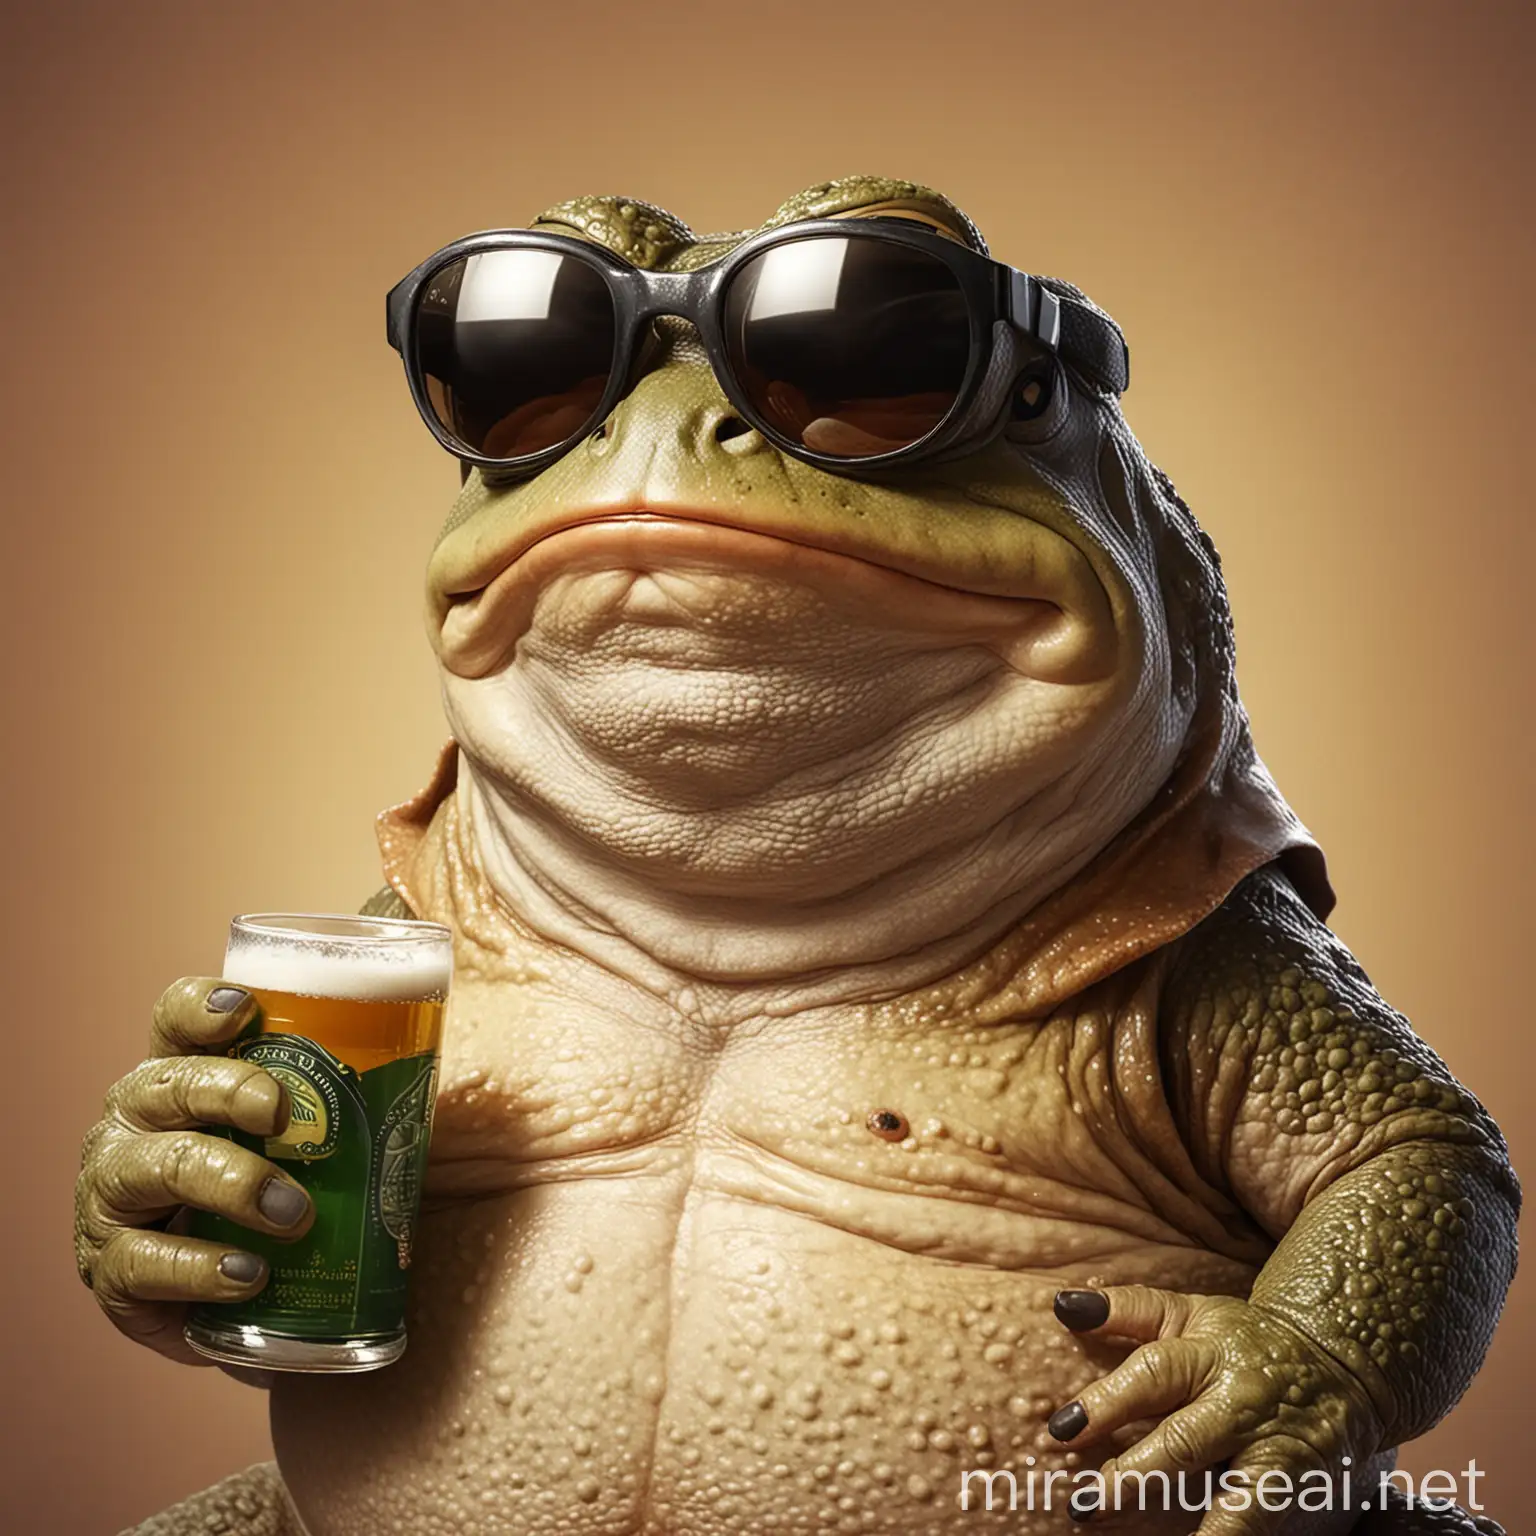 Smug Toad Wearing Sunglasses with Beer